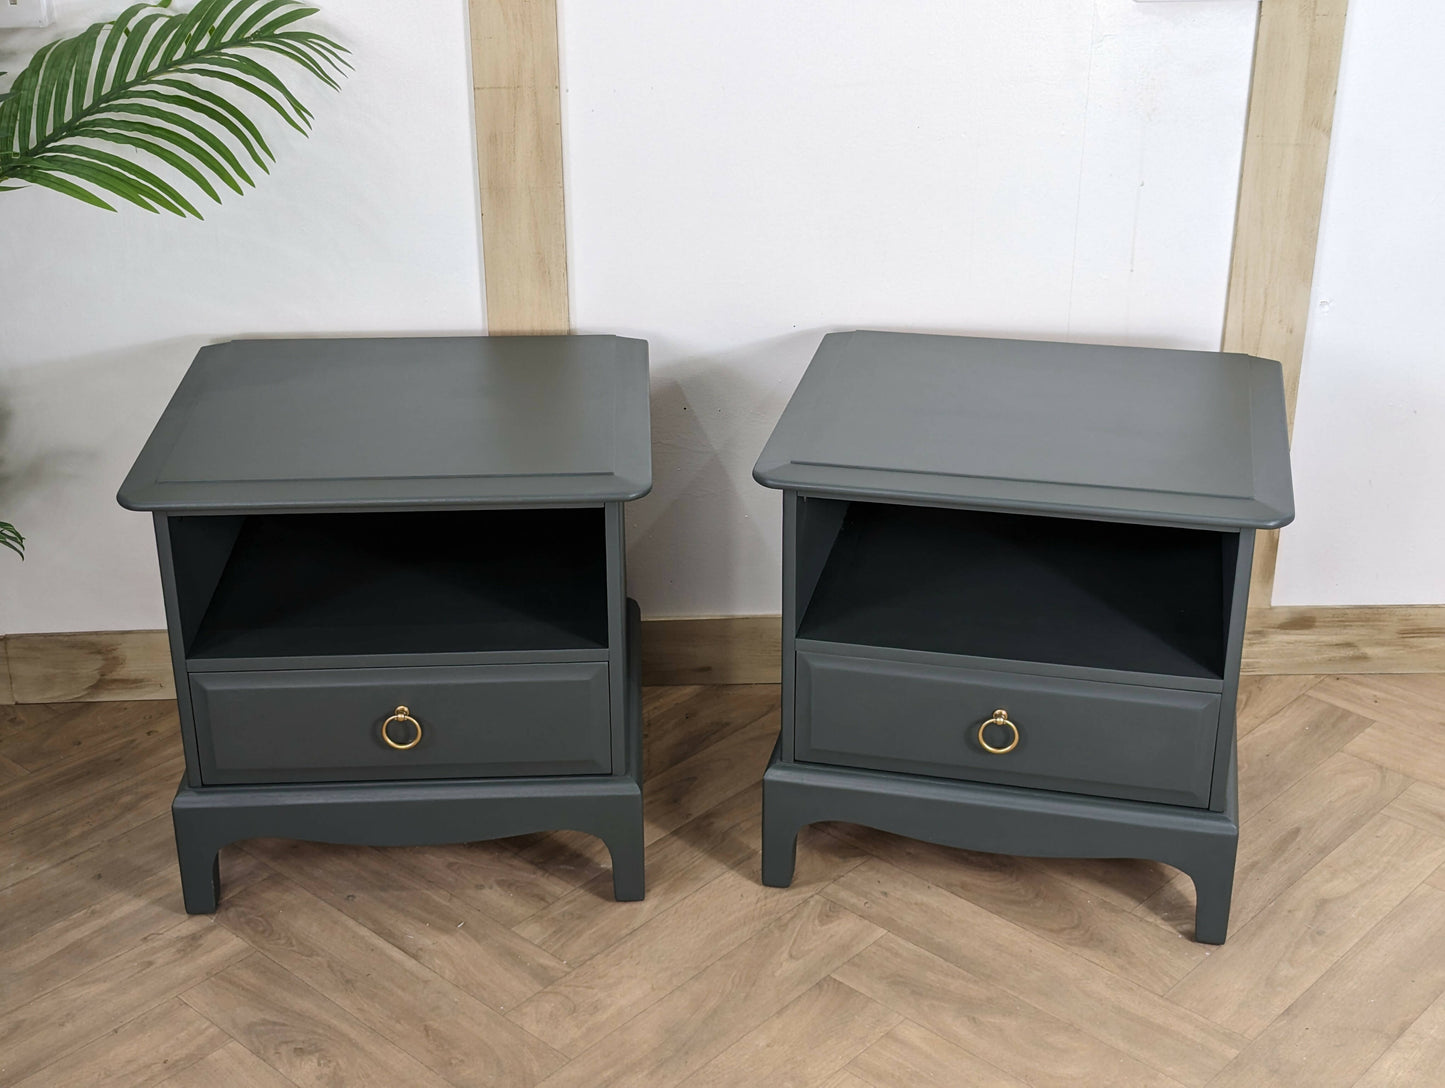 Stag Bedside Tables, spray painted Dark Green Gold bedside drawers, Stag Minstrel nightstands